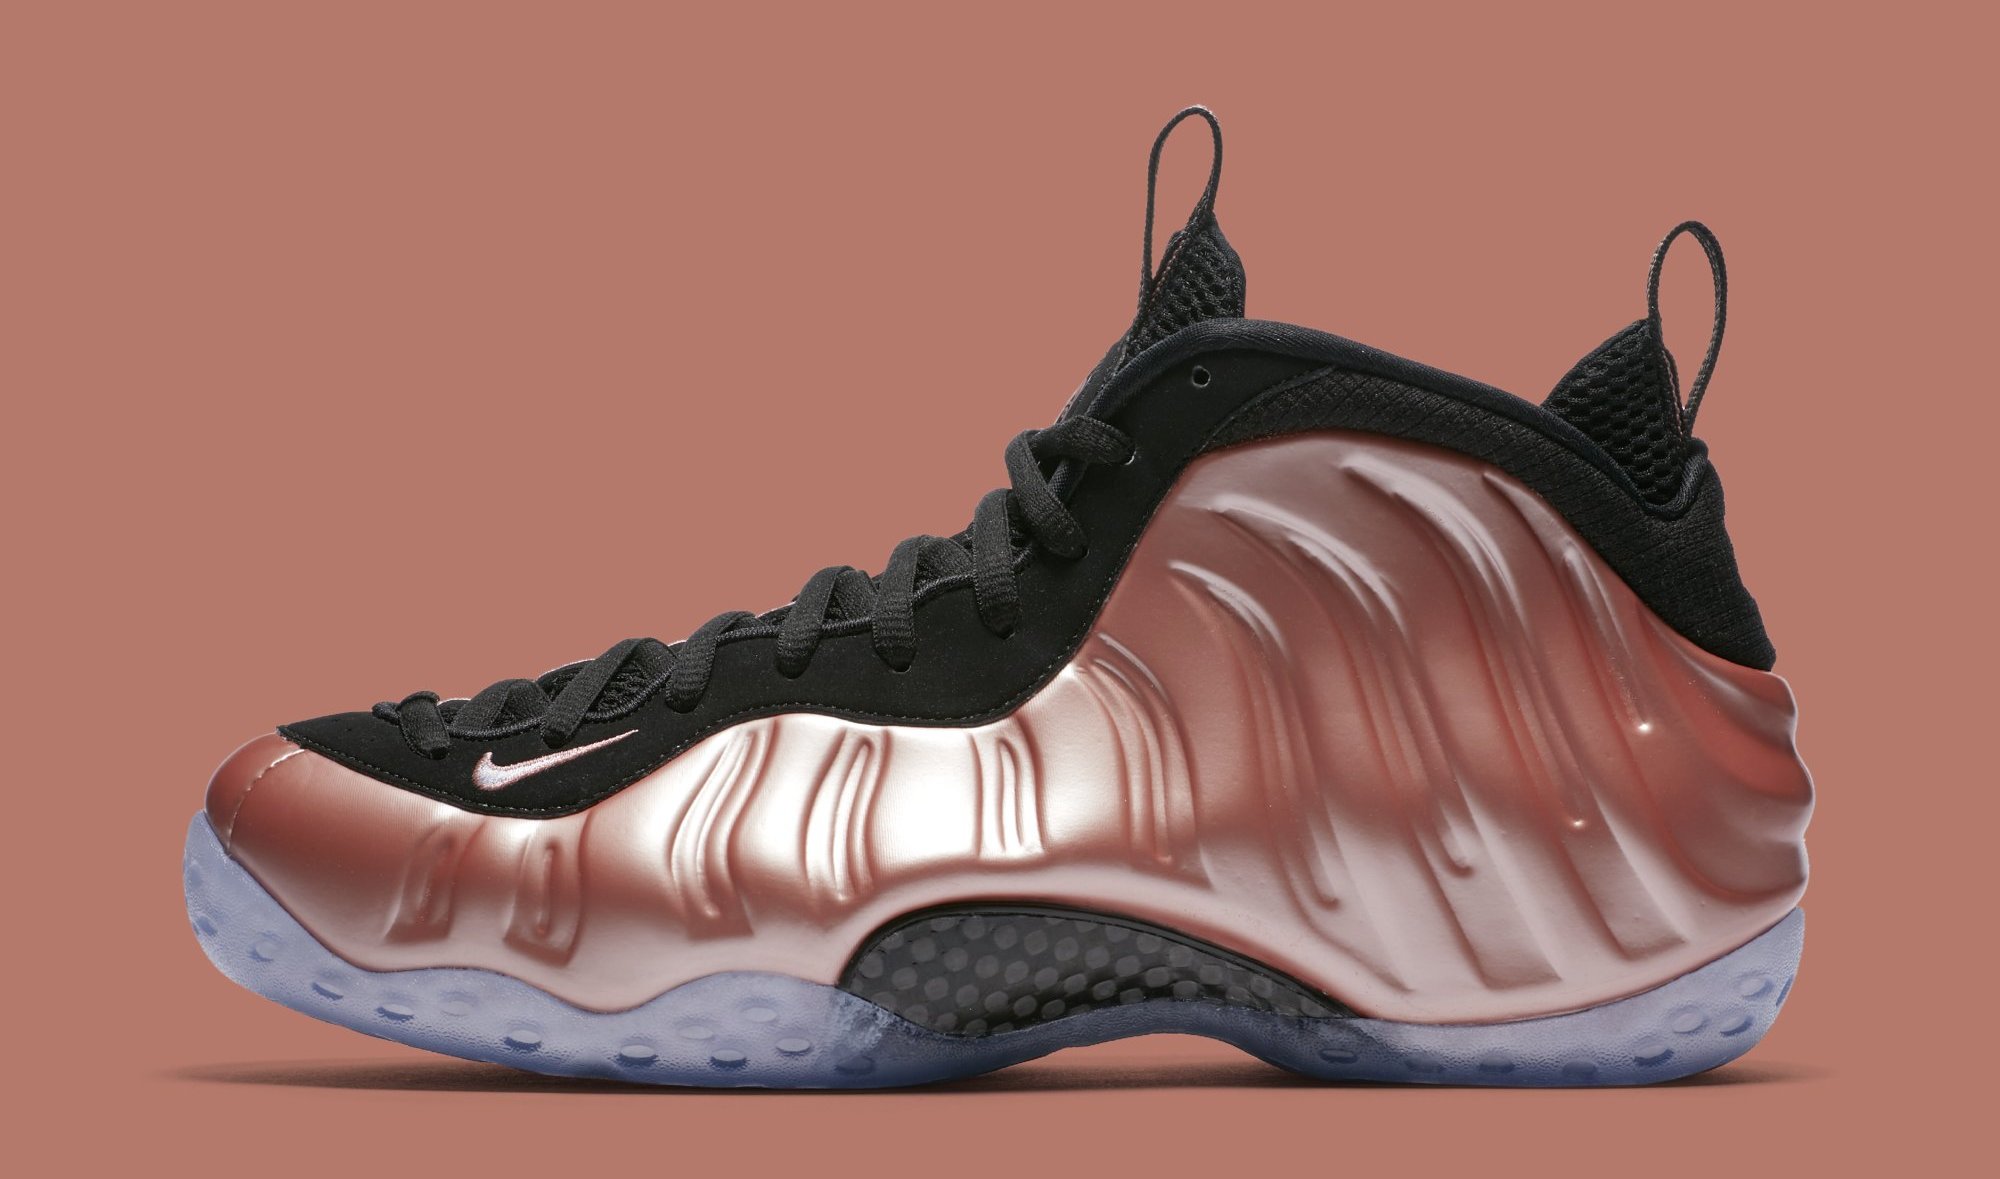 Nike Air Foamposite One &#x27;Elemental Rose&#x27; 314996 602 (Lateral)